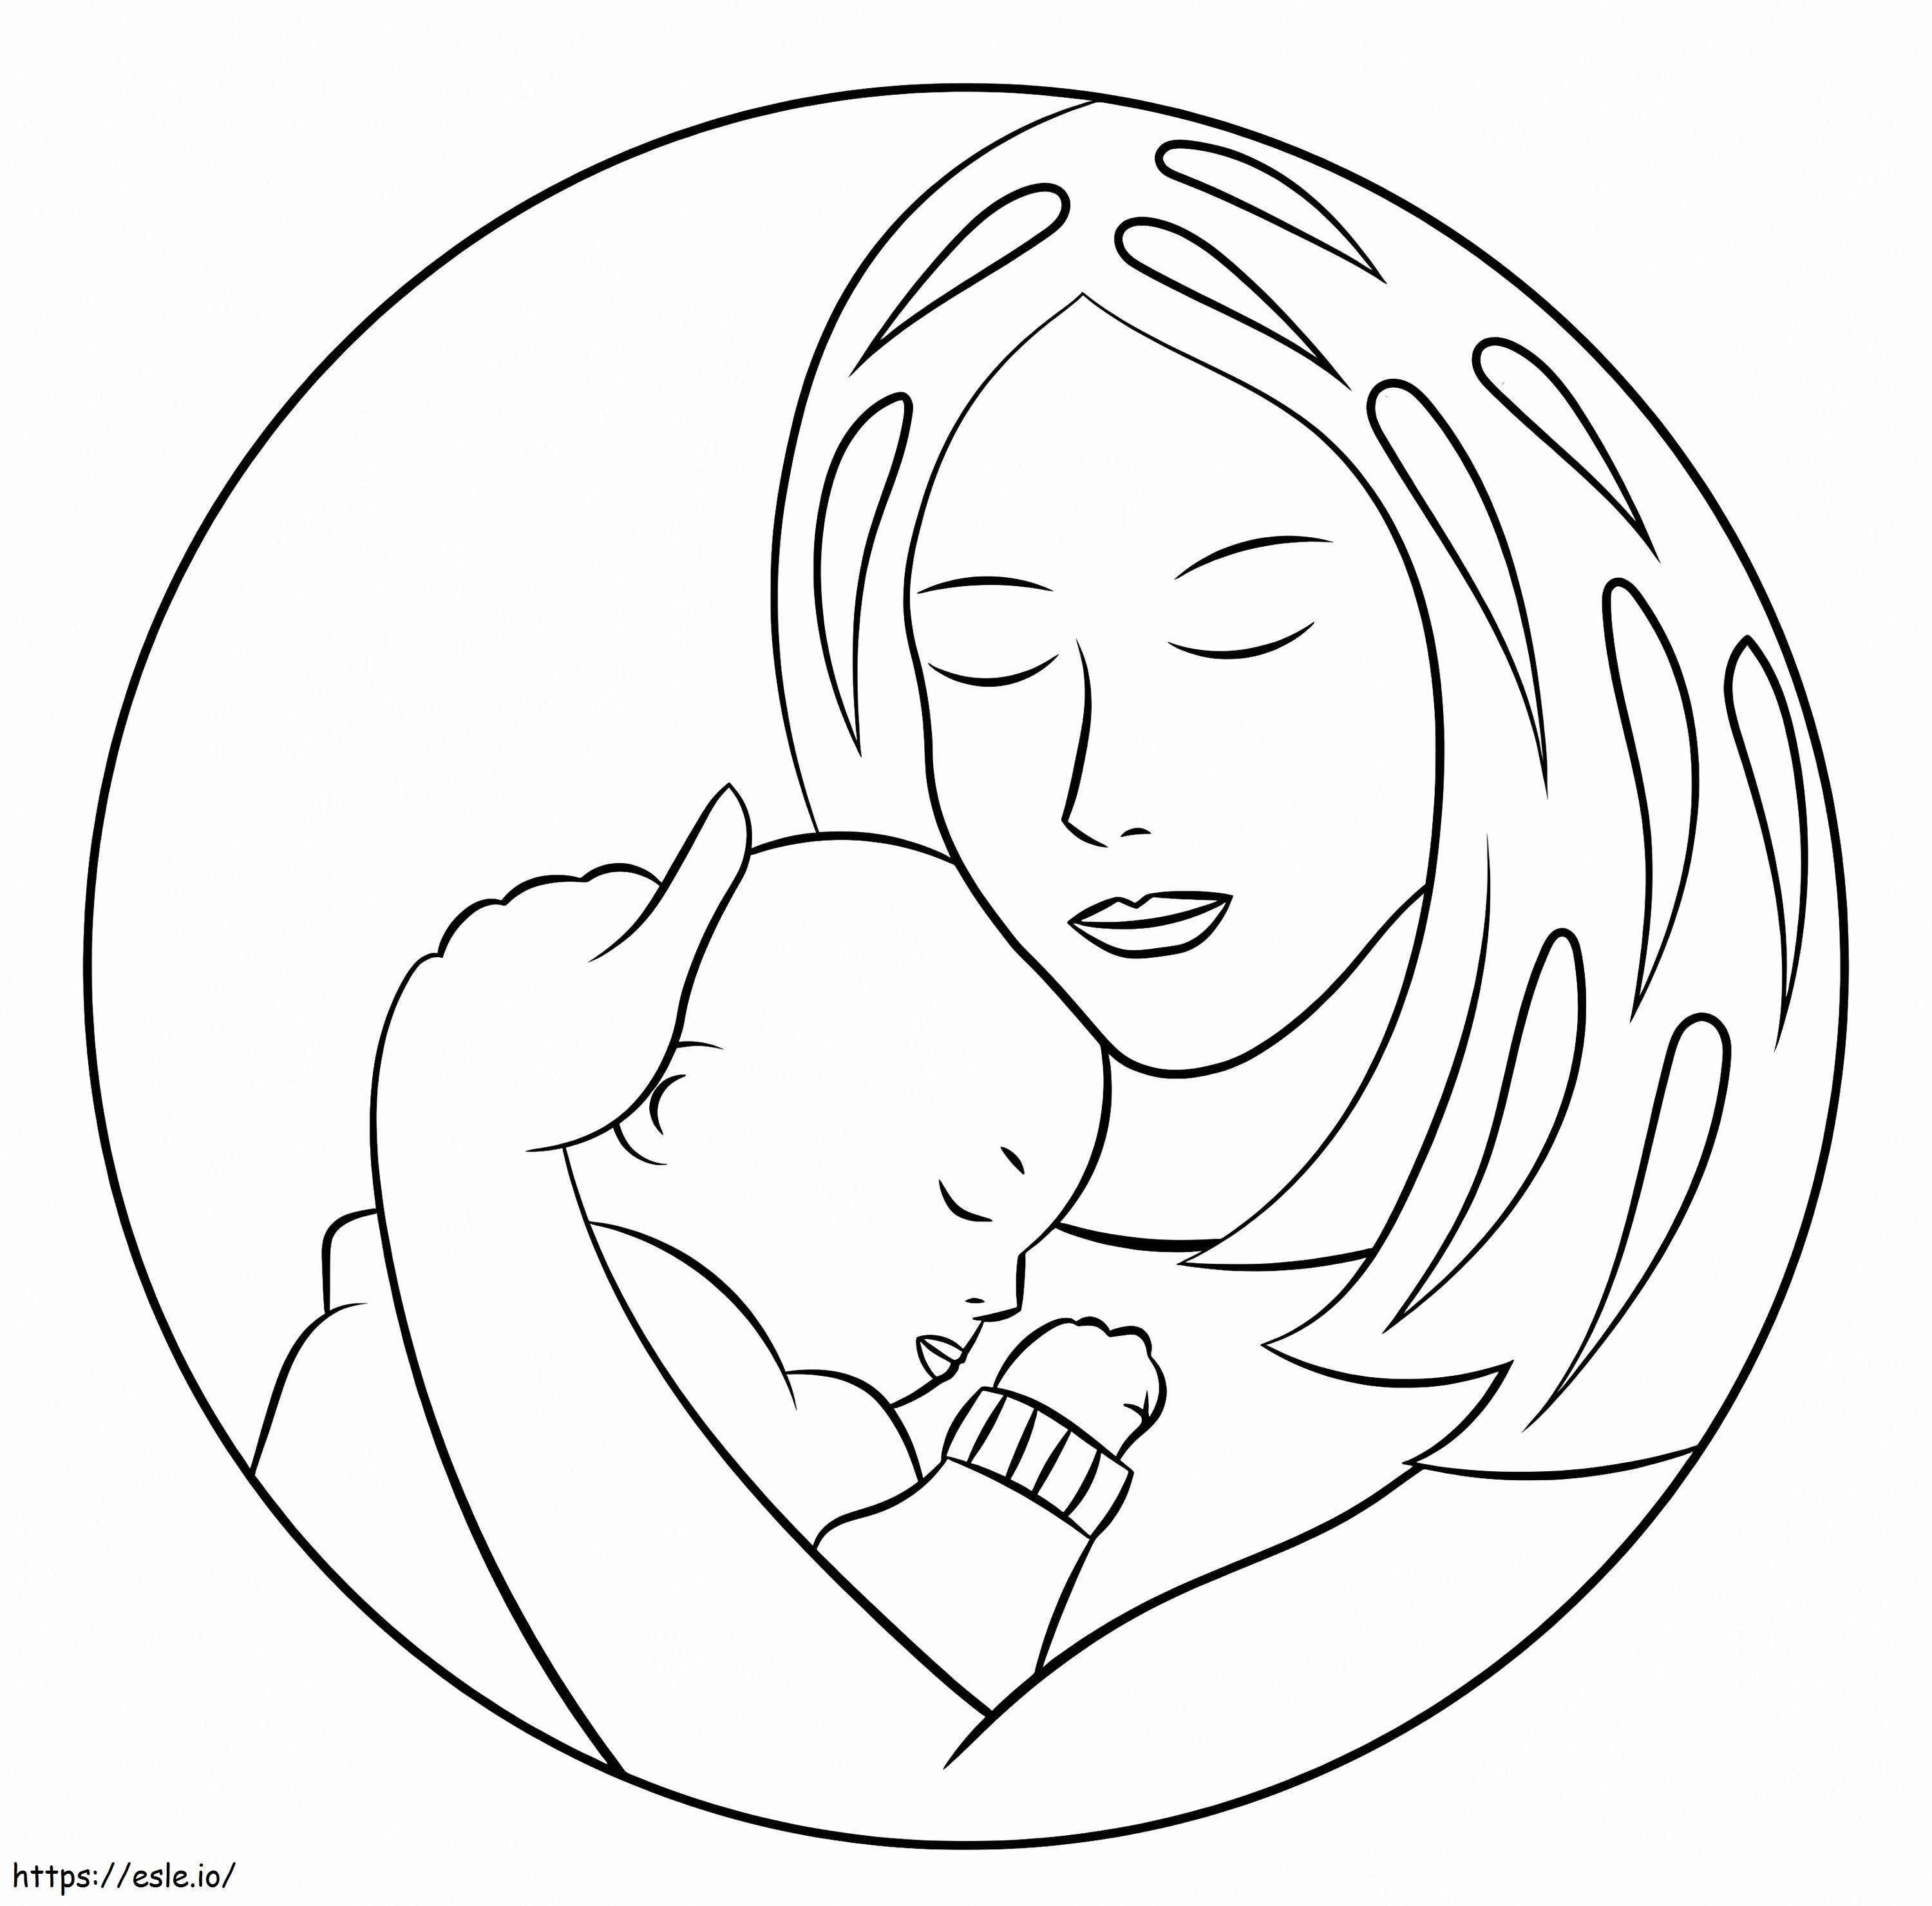 A Mother And Baby coloring page